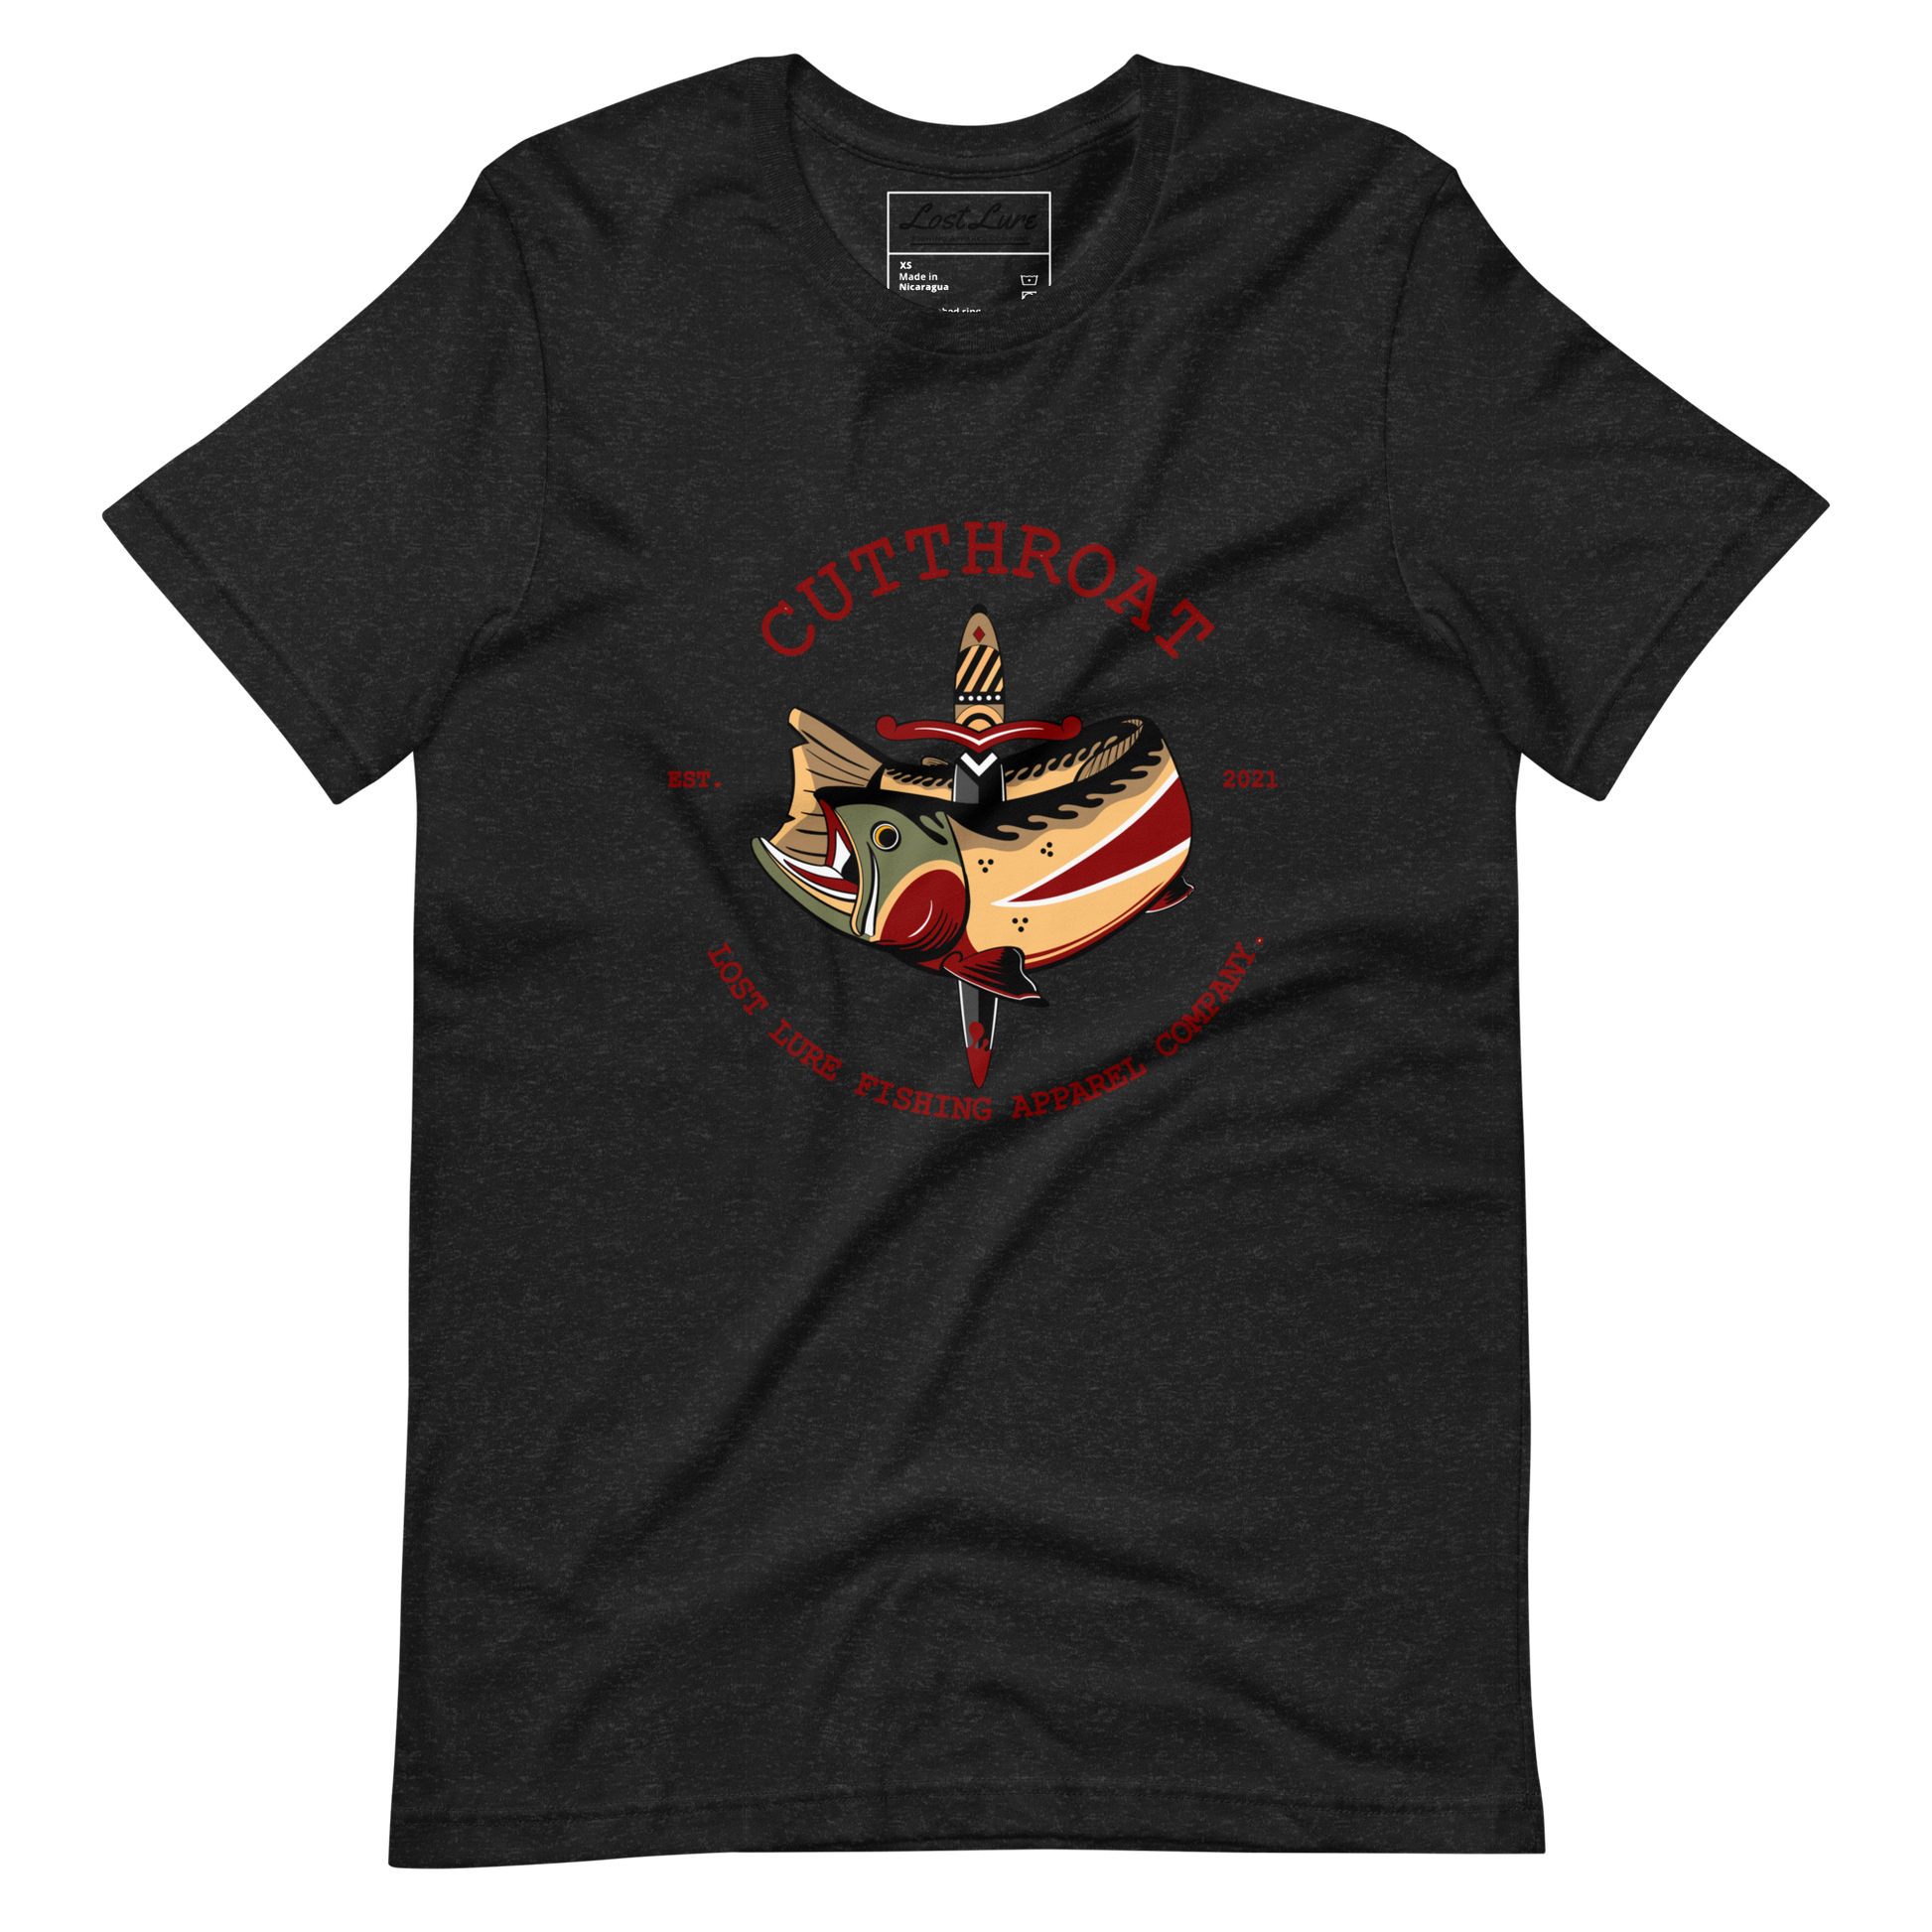 Cutthroat Trout fishing shirt. It’s an American traditional style design with a cutthroat trout and a dagger. The shirt reads Cutthroat trout, est. 2021, lost lure fishing apparel company. The fishing design is on the front of the shirt. Dark grey fishing shirt, front side